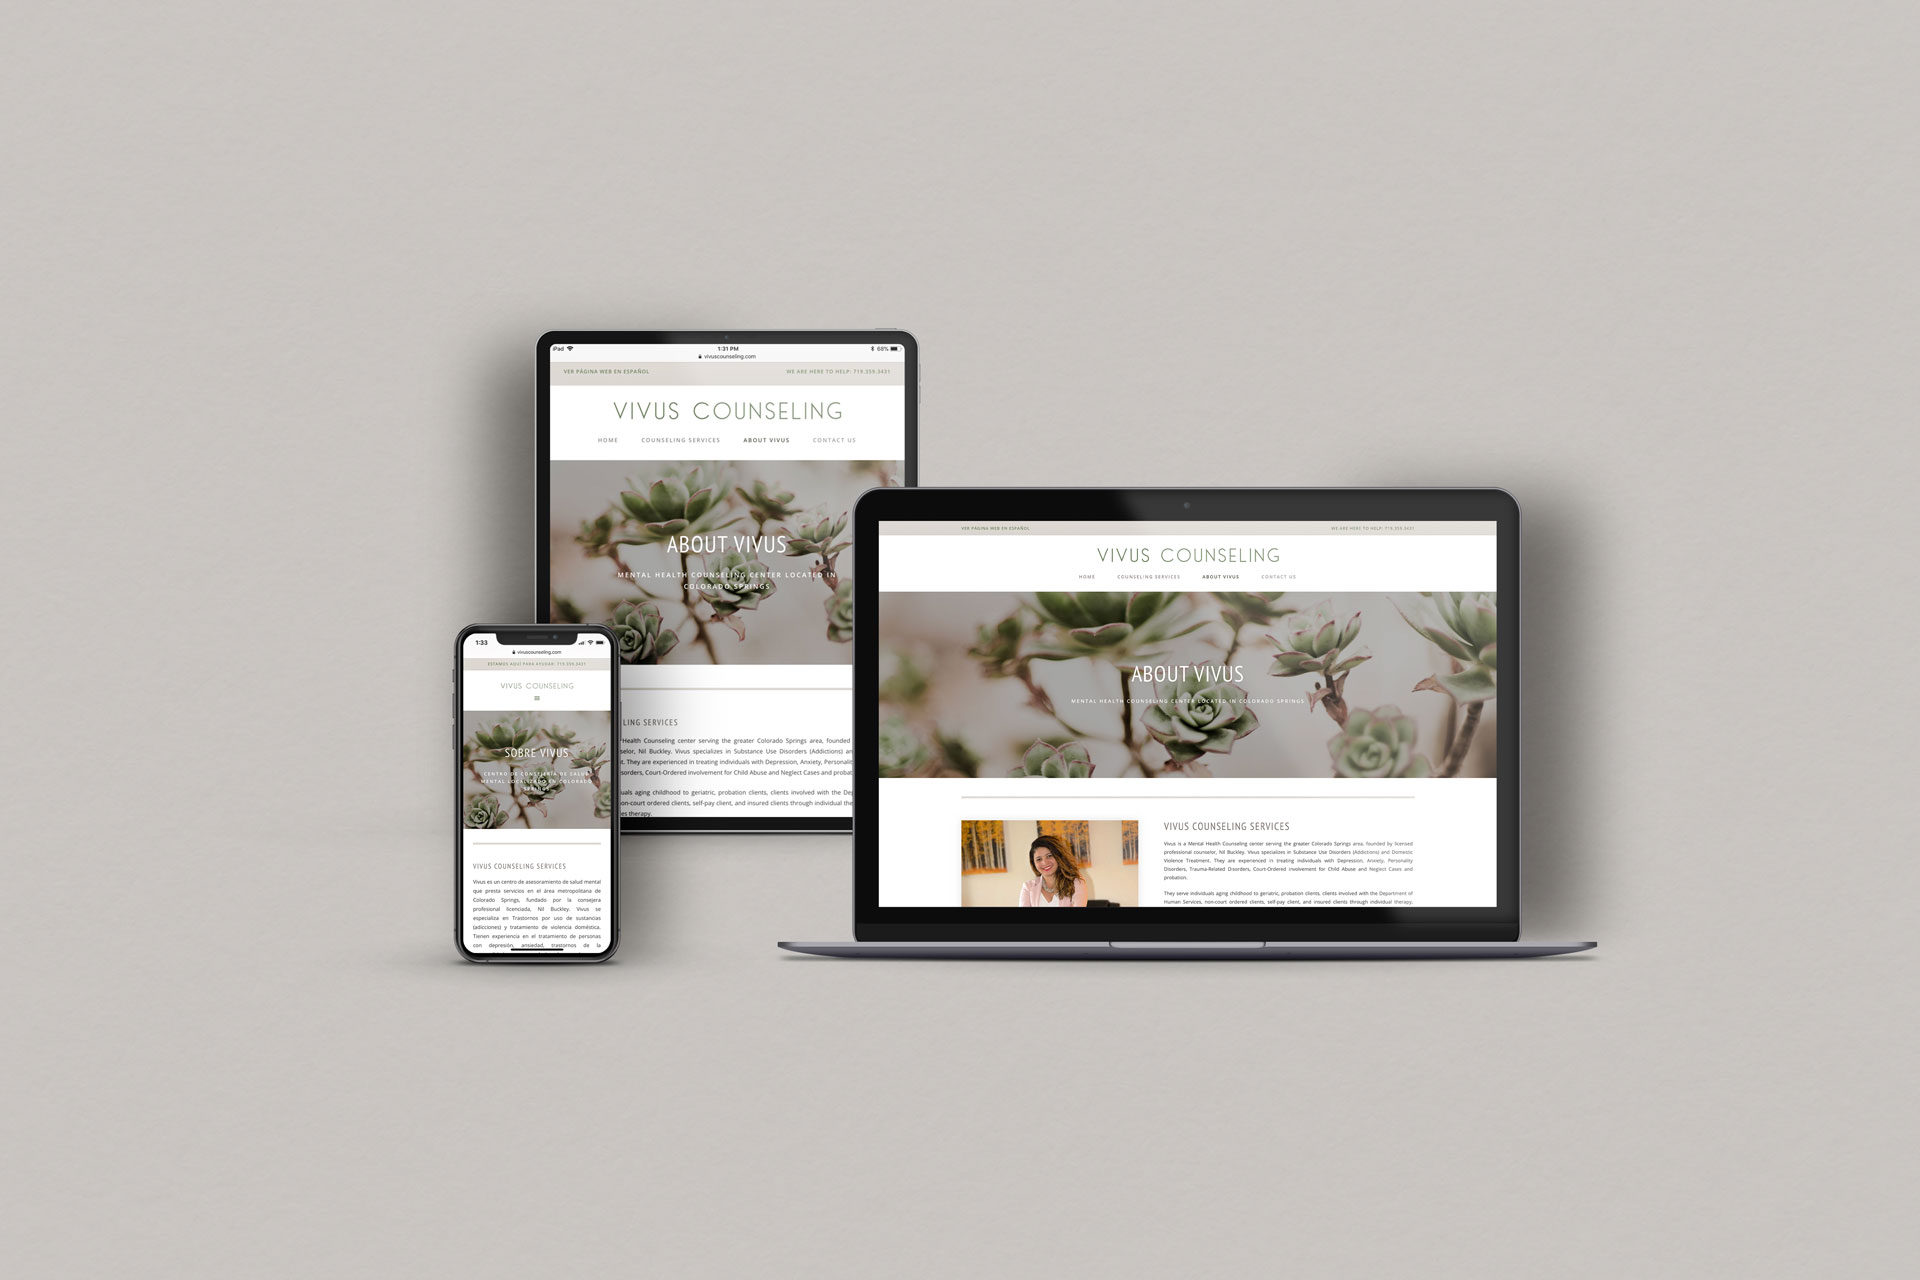 Website design about page mockups laptop iphone ipad - Vivus Counseling - Whiskey and Red Small Business Branding and Website Design Packages